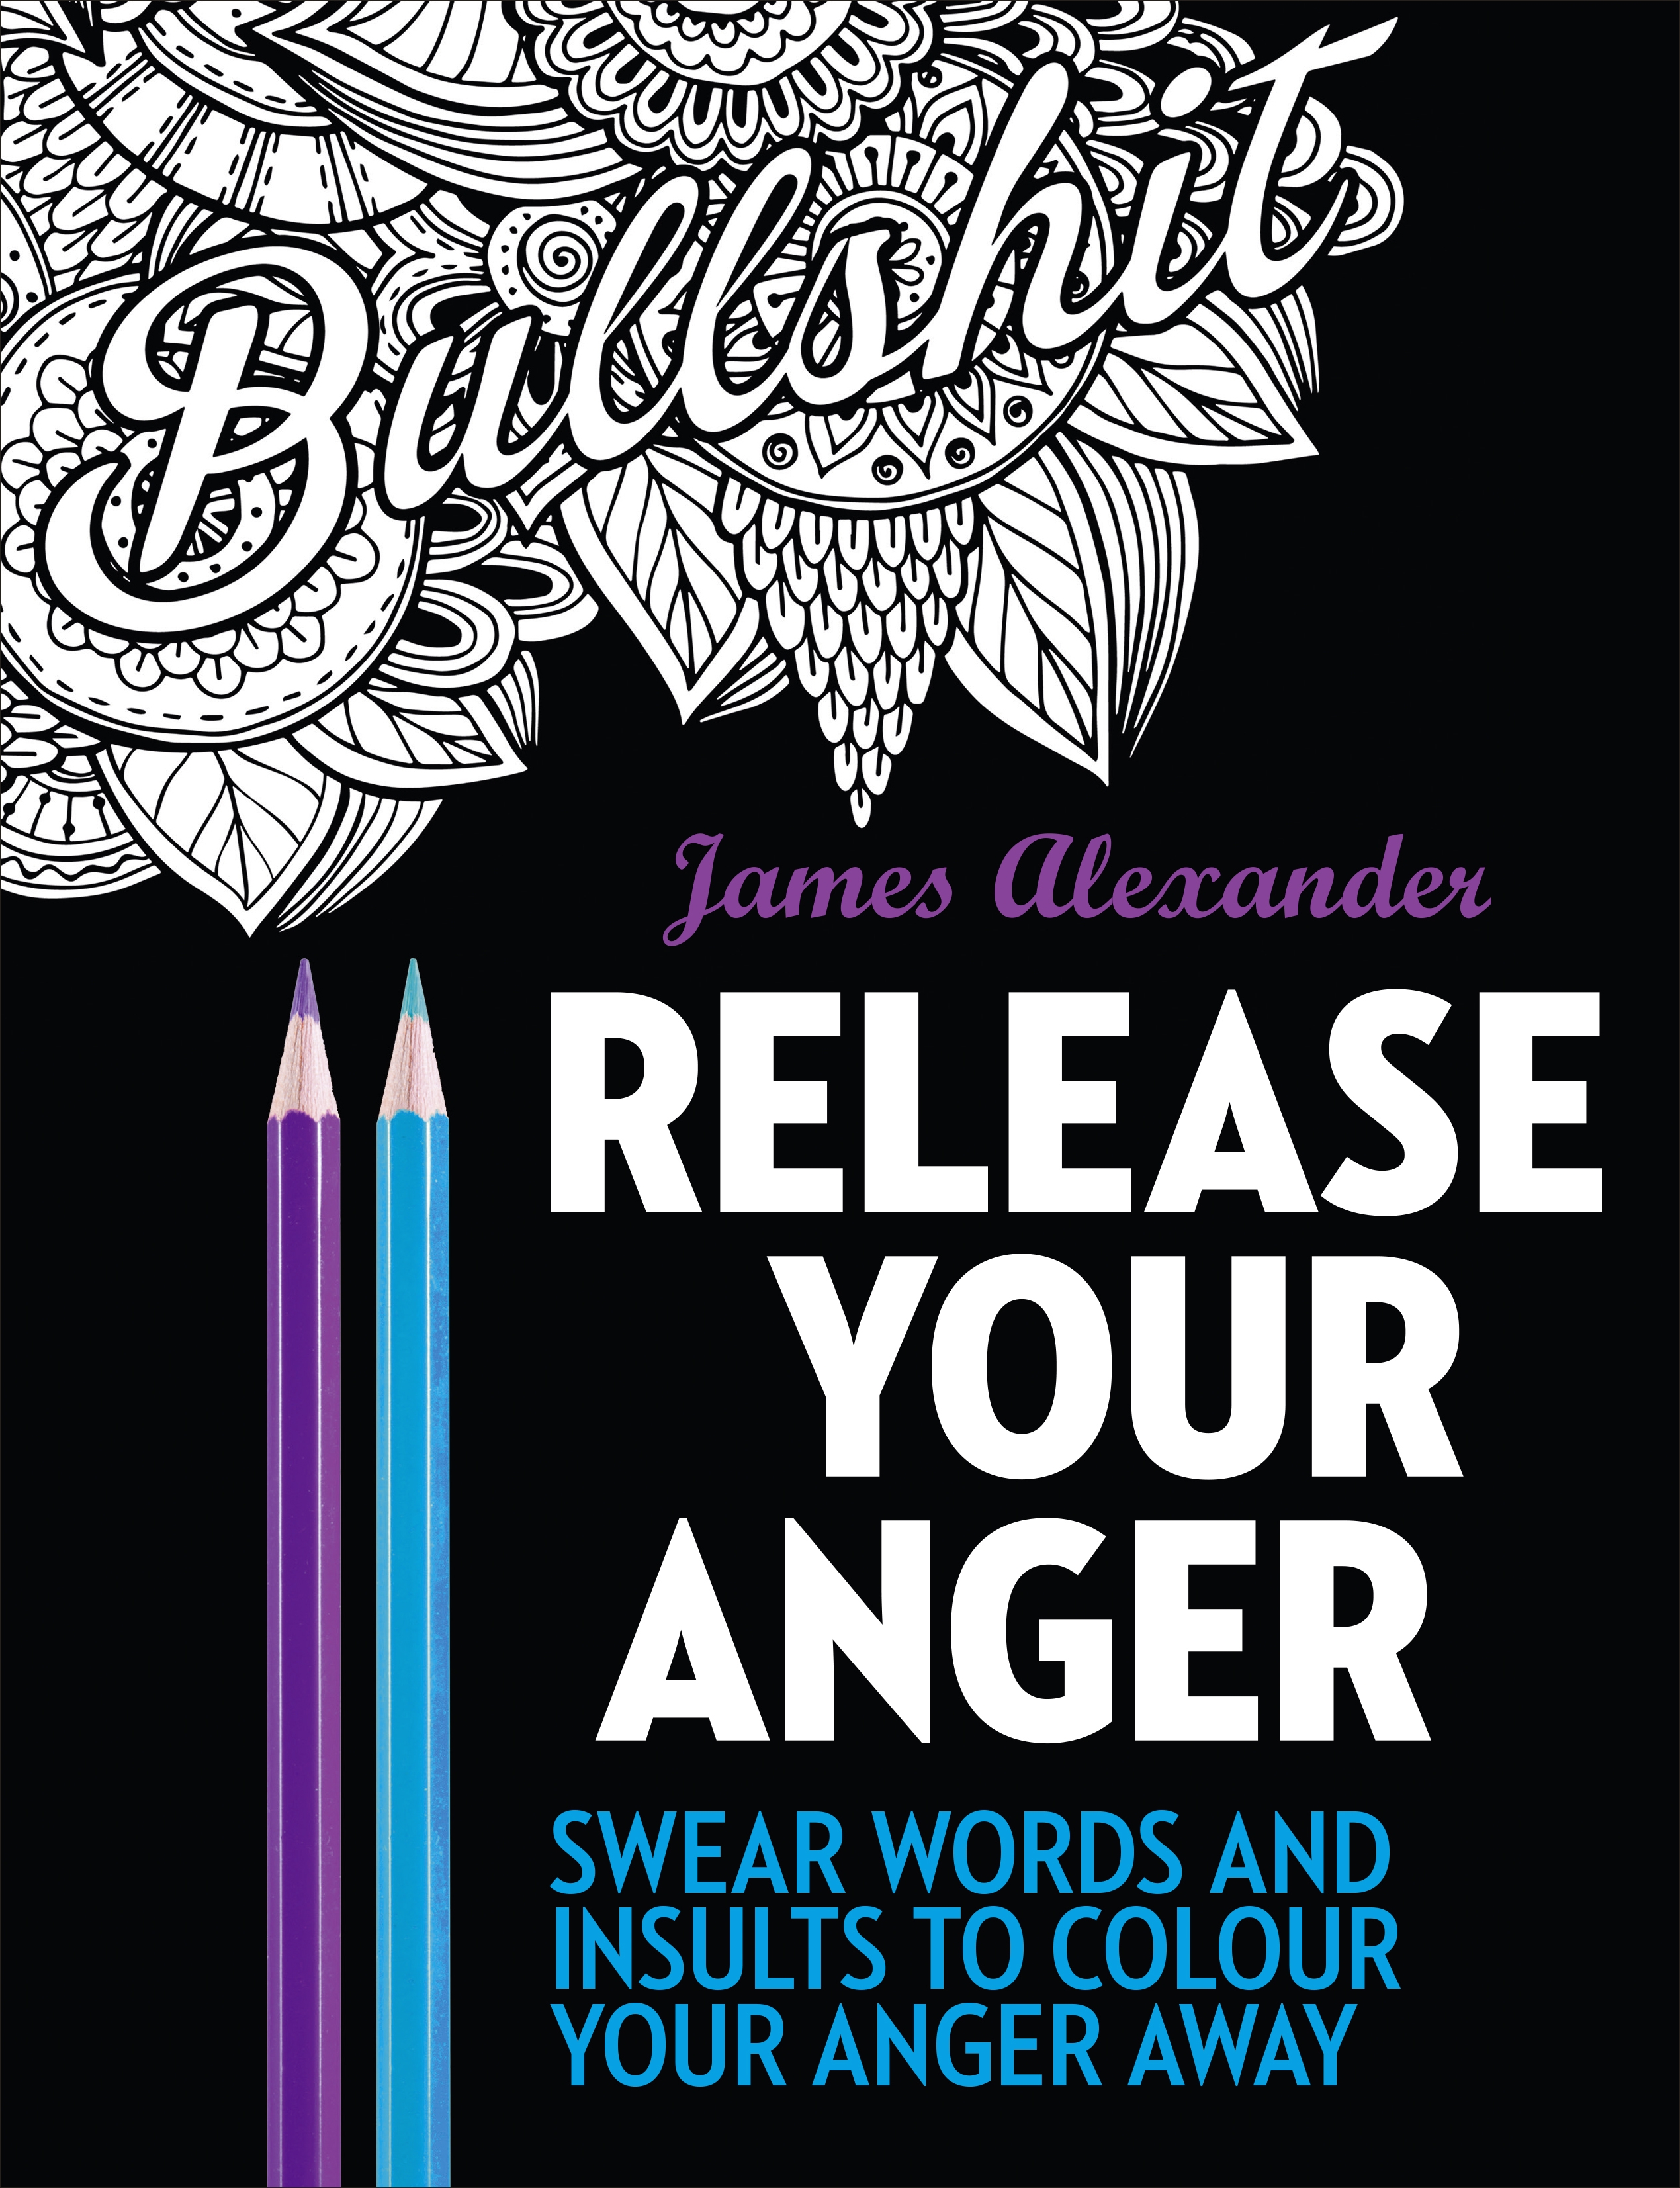 Download Release Your Anger Midnight Edition An Adult Coloring Book With 40 Swear Words To Color And Relax By James Alexander Penguin Books Australia